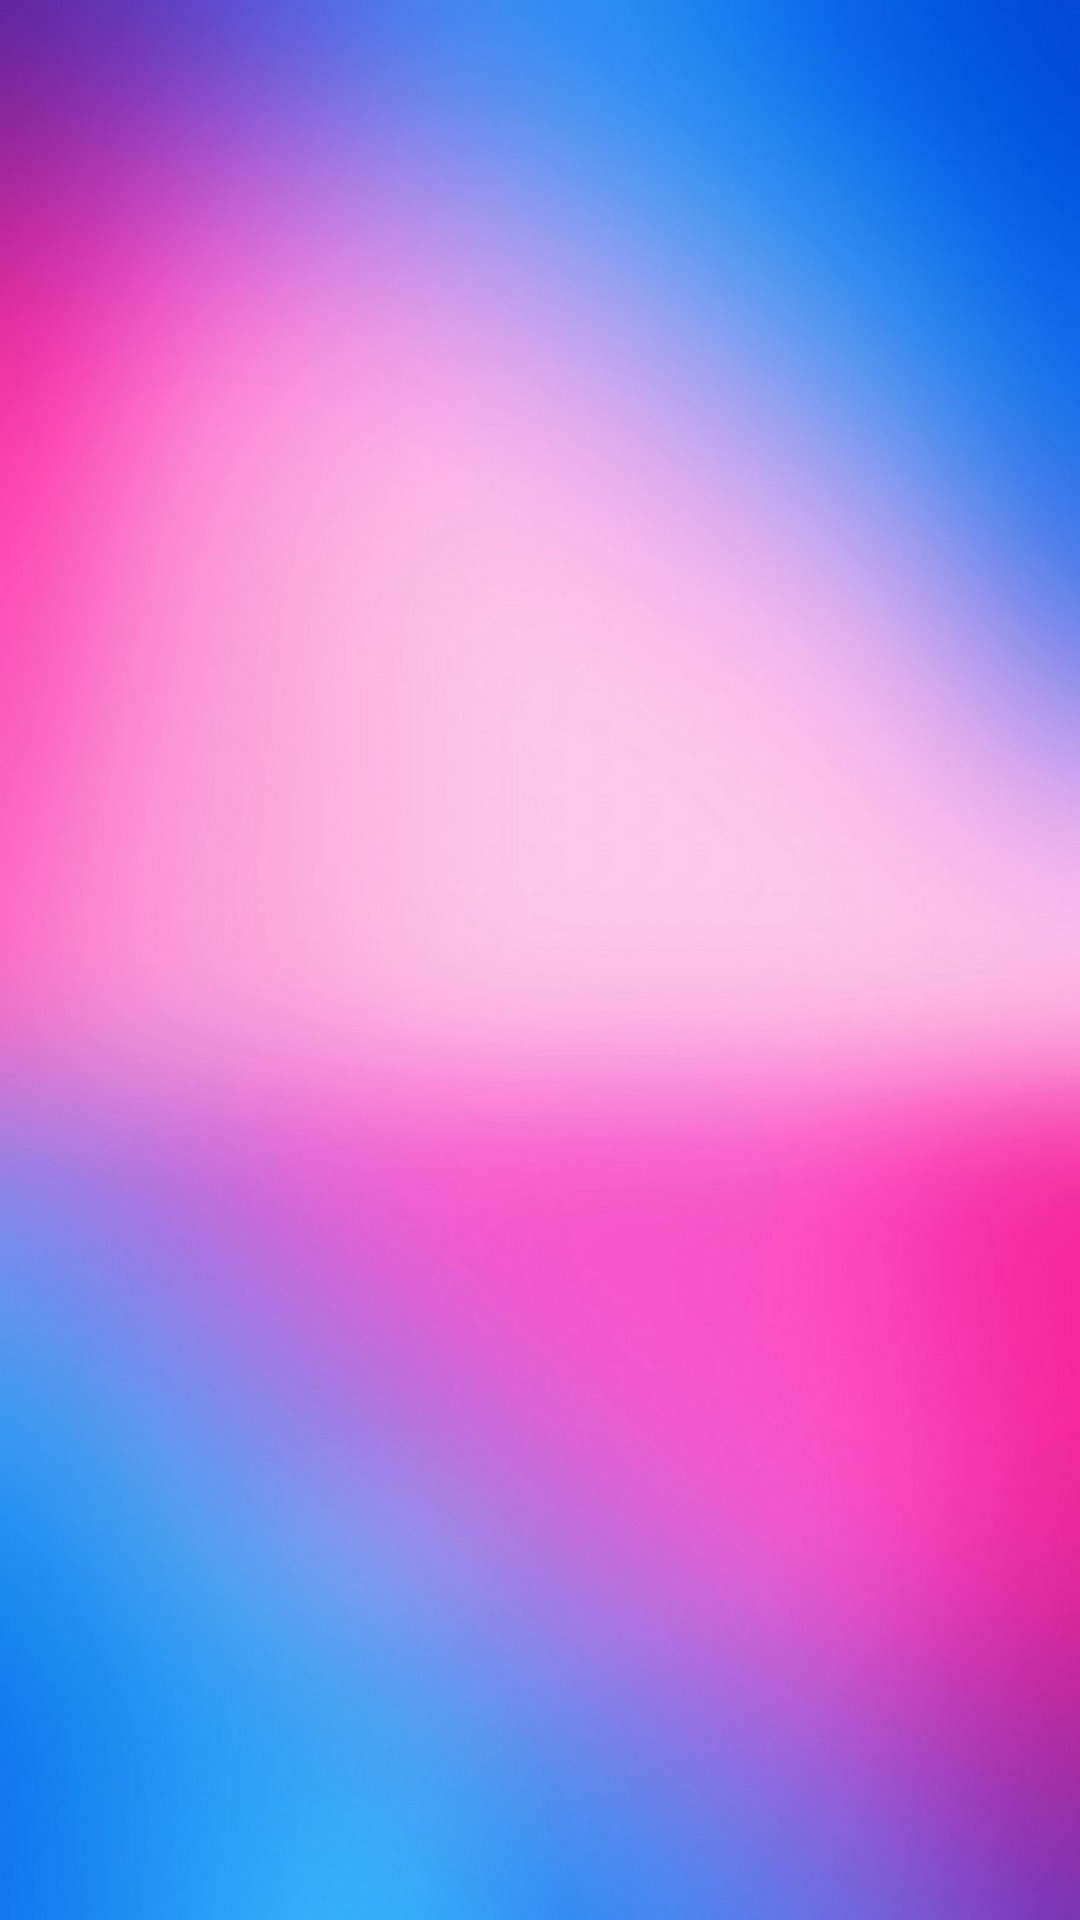 Gradient iPhone Wallpaper Tumblr with high-resolution 1080x1920 pixel. You can set as wallpaper for Apple iPhone X, XS Max, XR, 8, 7, 6, SE, iPad. Enjoy and share your favorite HD wallpapers and background images